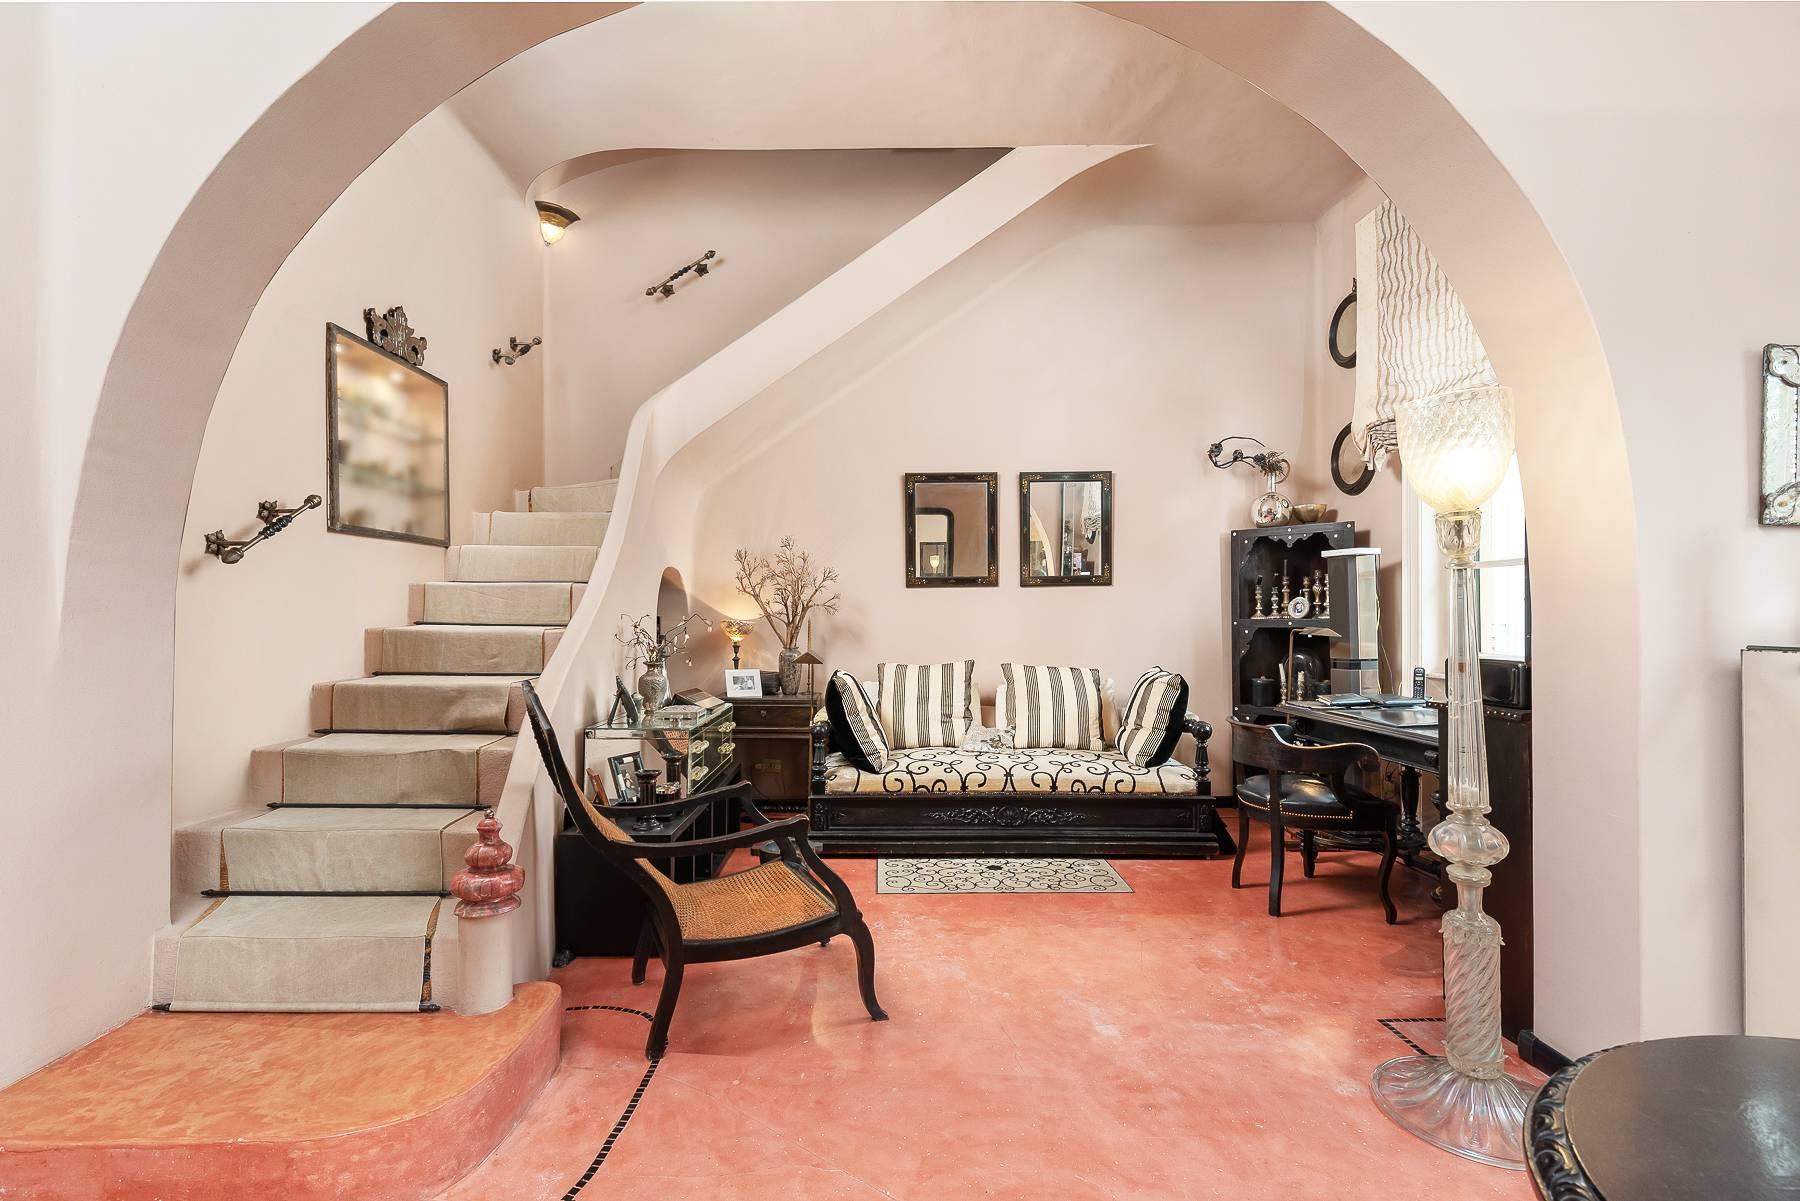 Penthouse with terraces overlooking Villa Borghese - 4